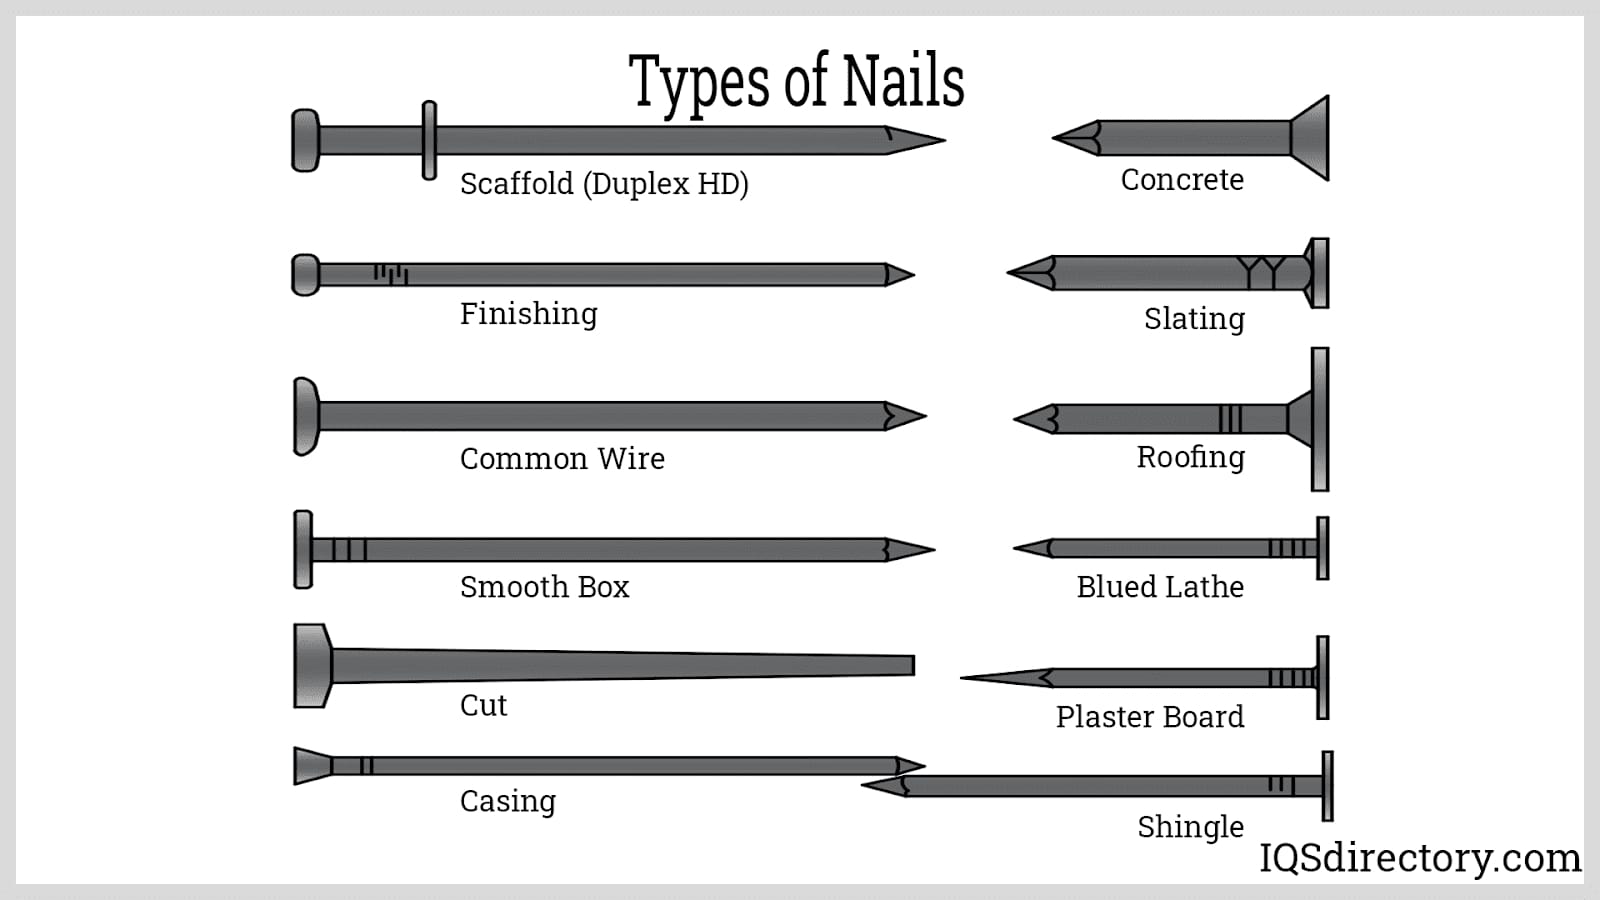 Fastener: What Is It? How Is It Used? Types Of, Materials